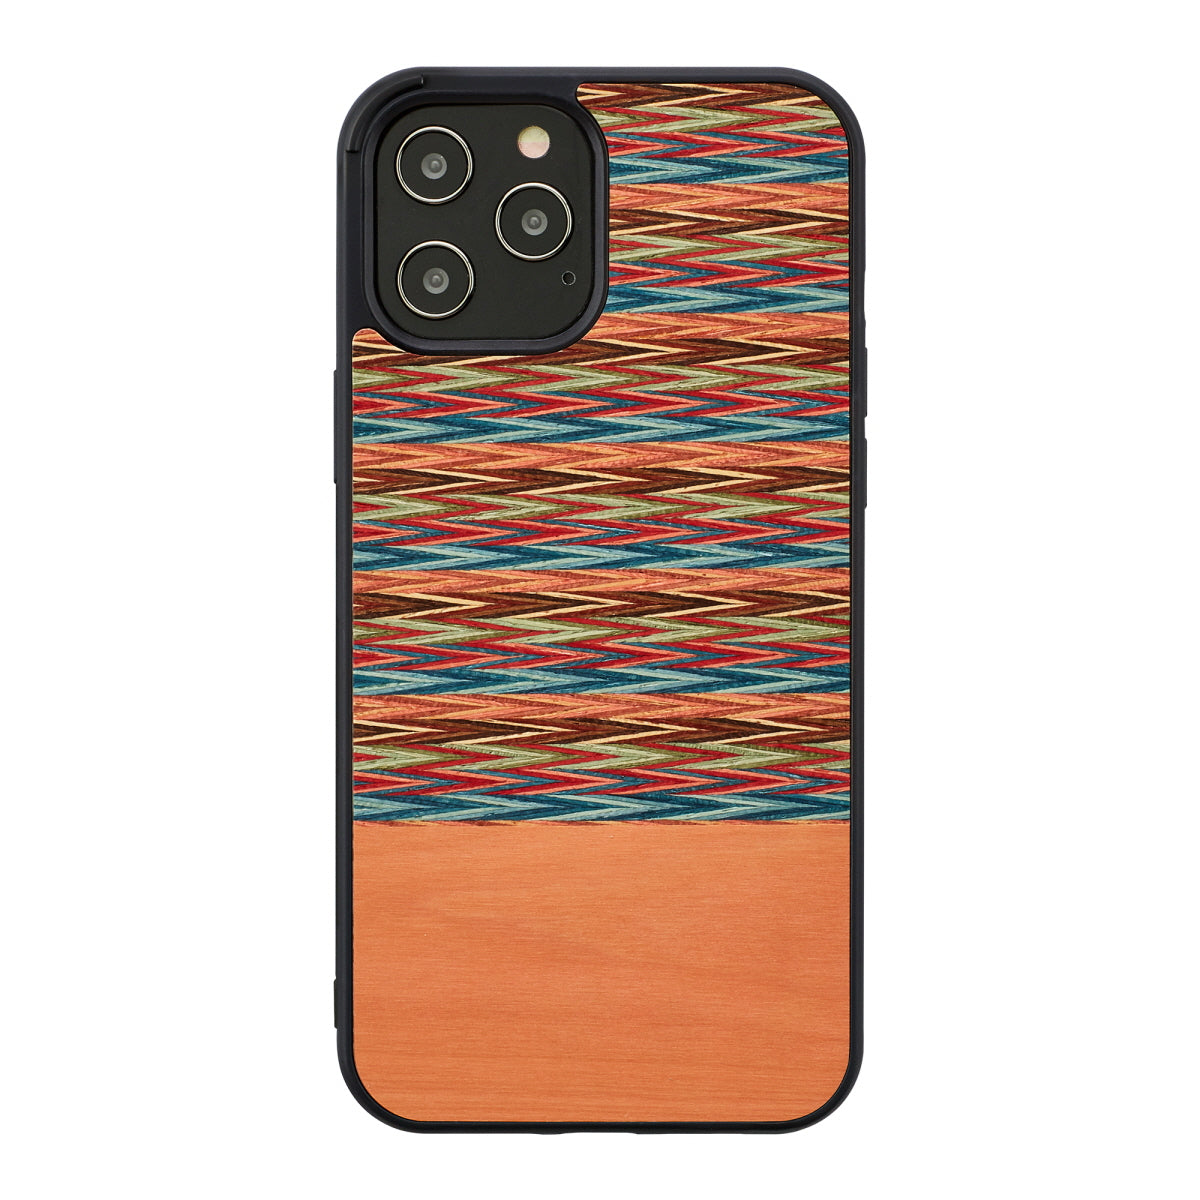 Man & Wood Case For iPhone 12 Pro Max - Browny Check